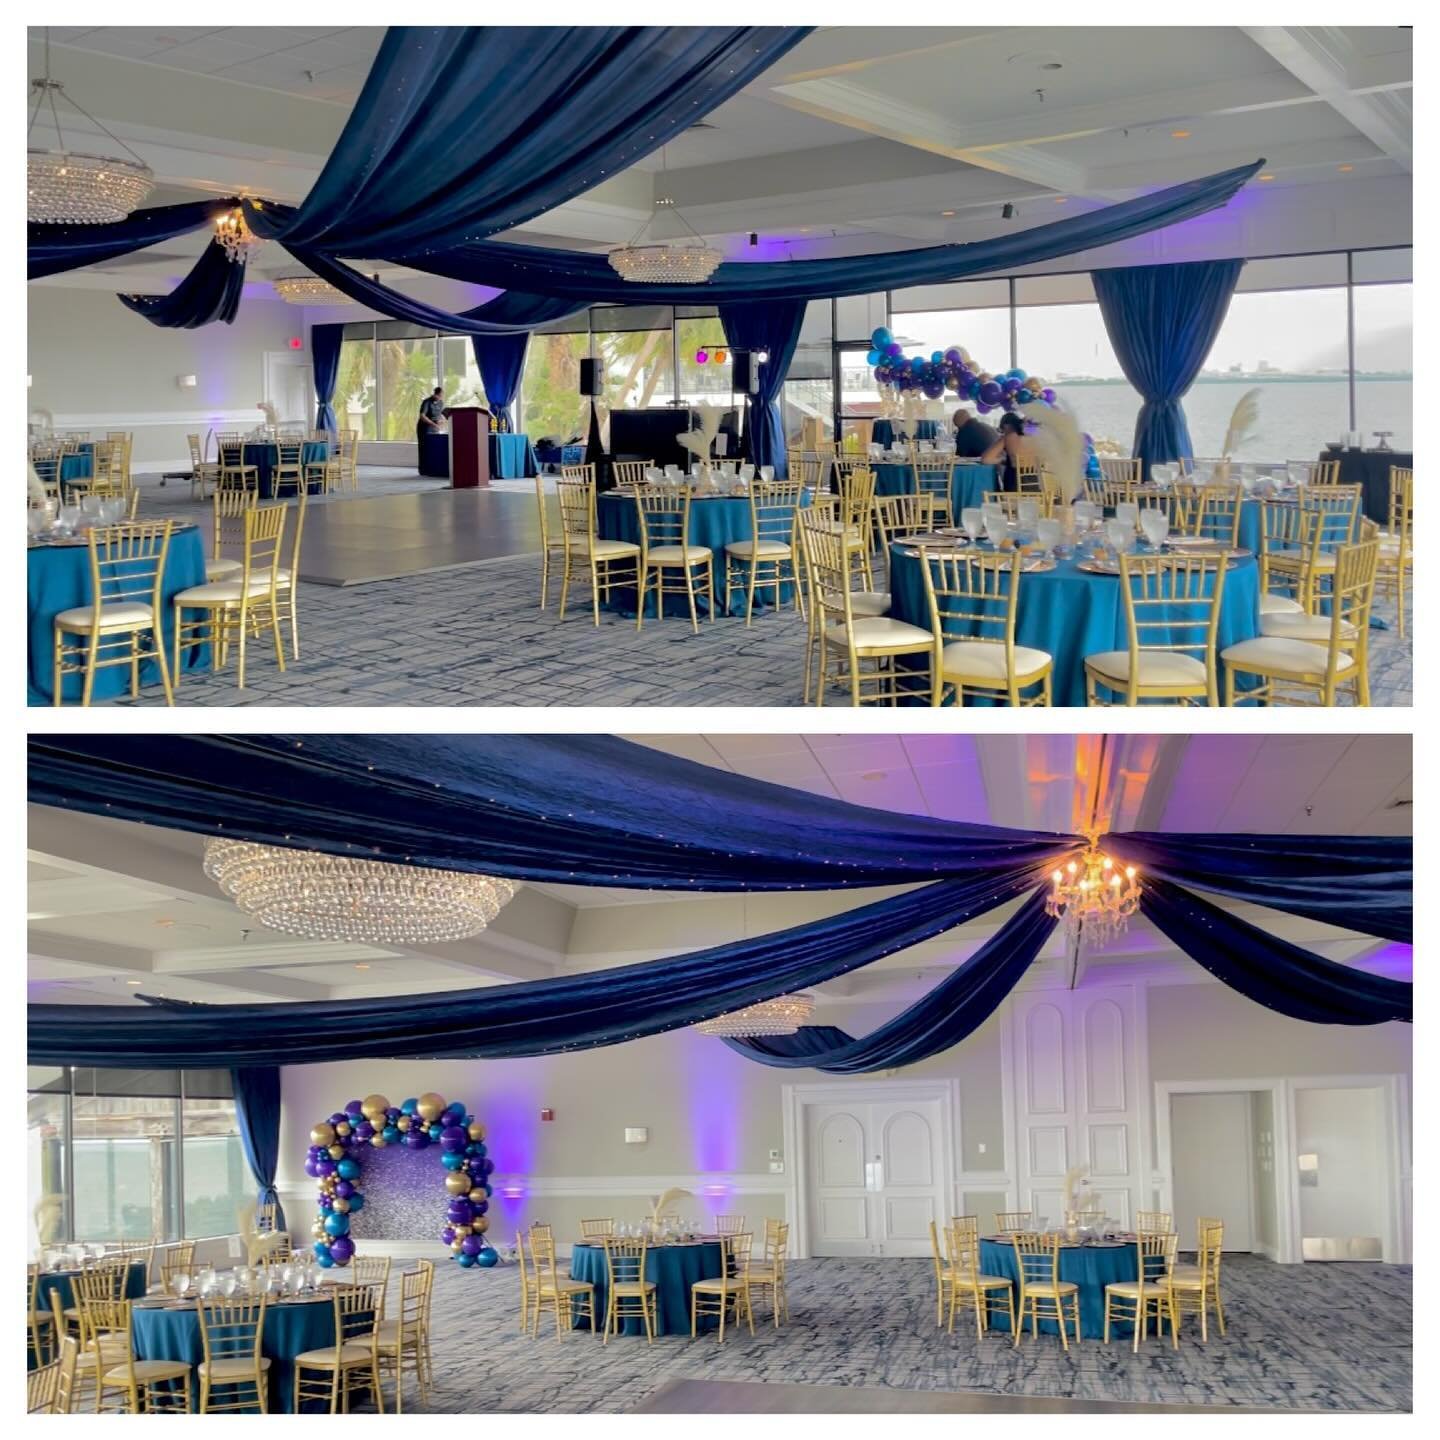 Wedding at the Rusty Pelican. We provided the Navy Blue Draped Ceiling Starburst, Navy Blue Draped Window Swags, &amp; Gold Chiavari Chairs. &mdash;&mdash;&mdash;&mdash;&mdash;&mdash;&mdash;&mdash;&mdash;&mdash;&mdash;&mdash;&mdash;&mdash;&mdash;&mda